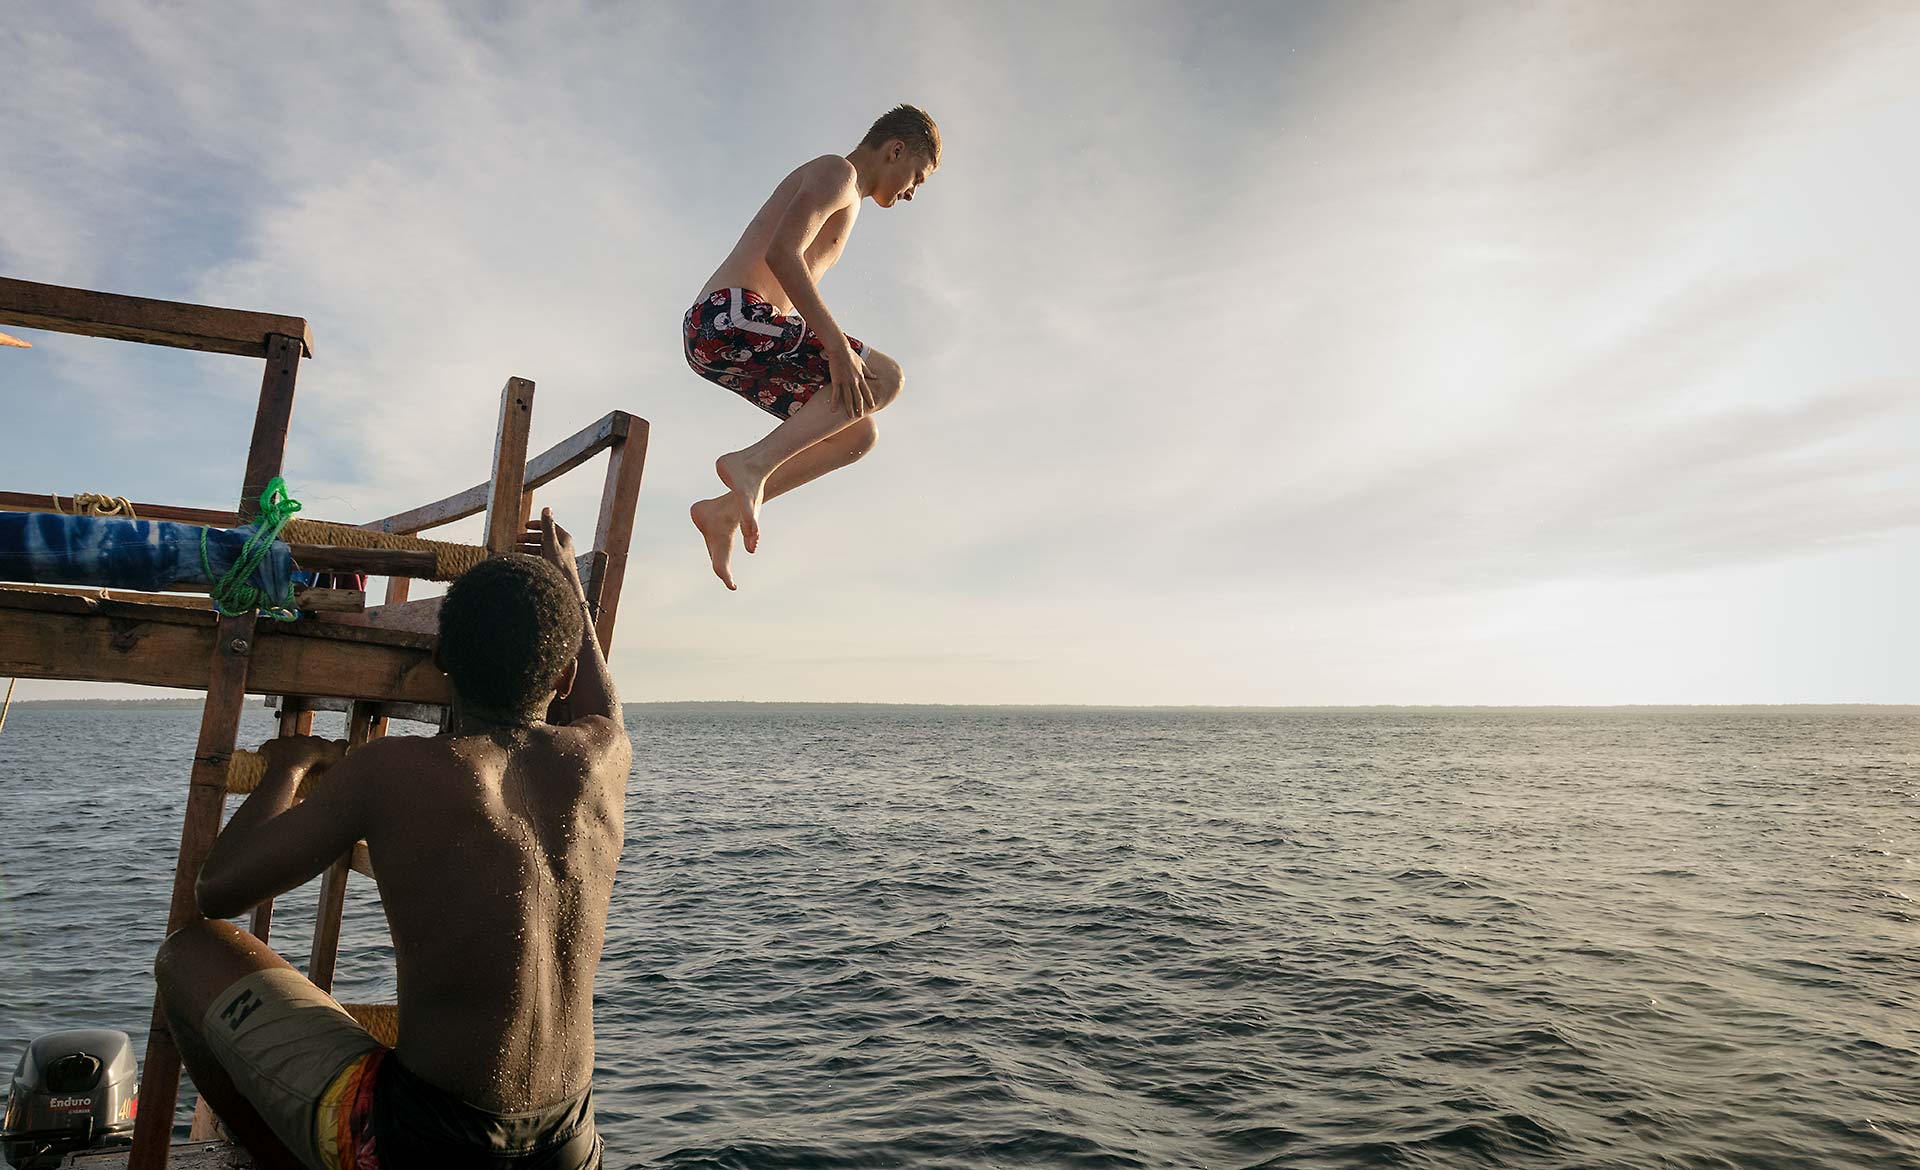 Boy jumping from boat